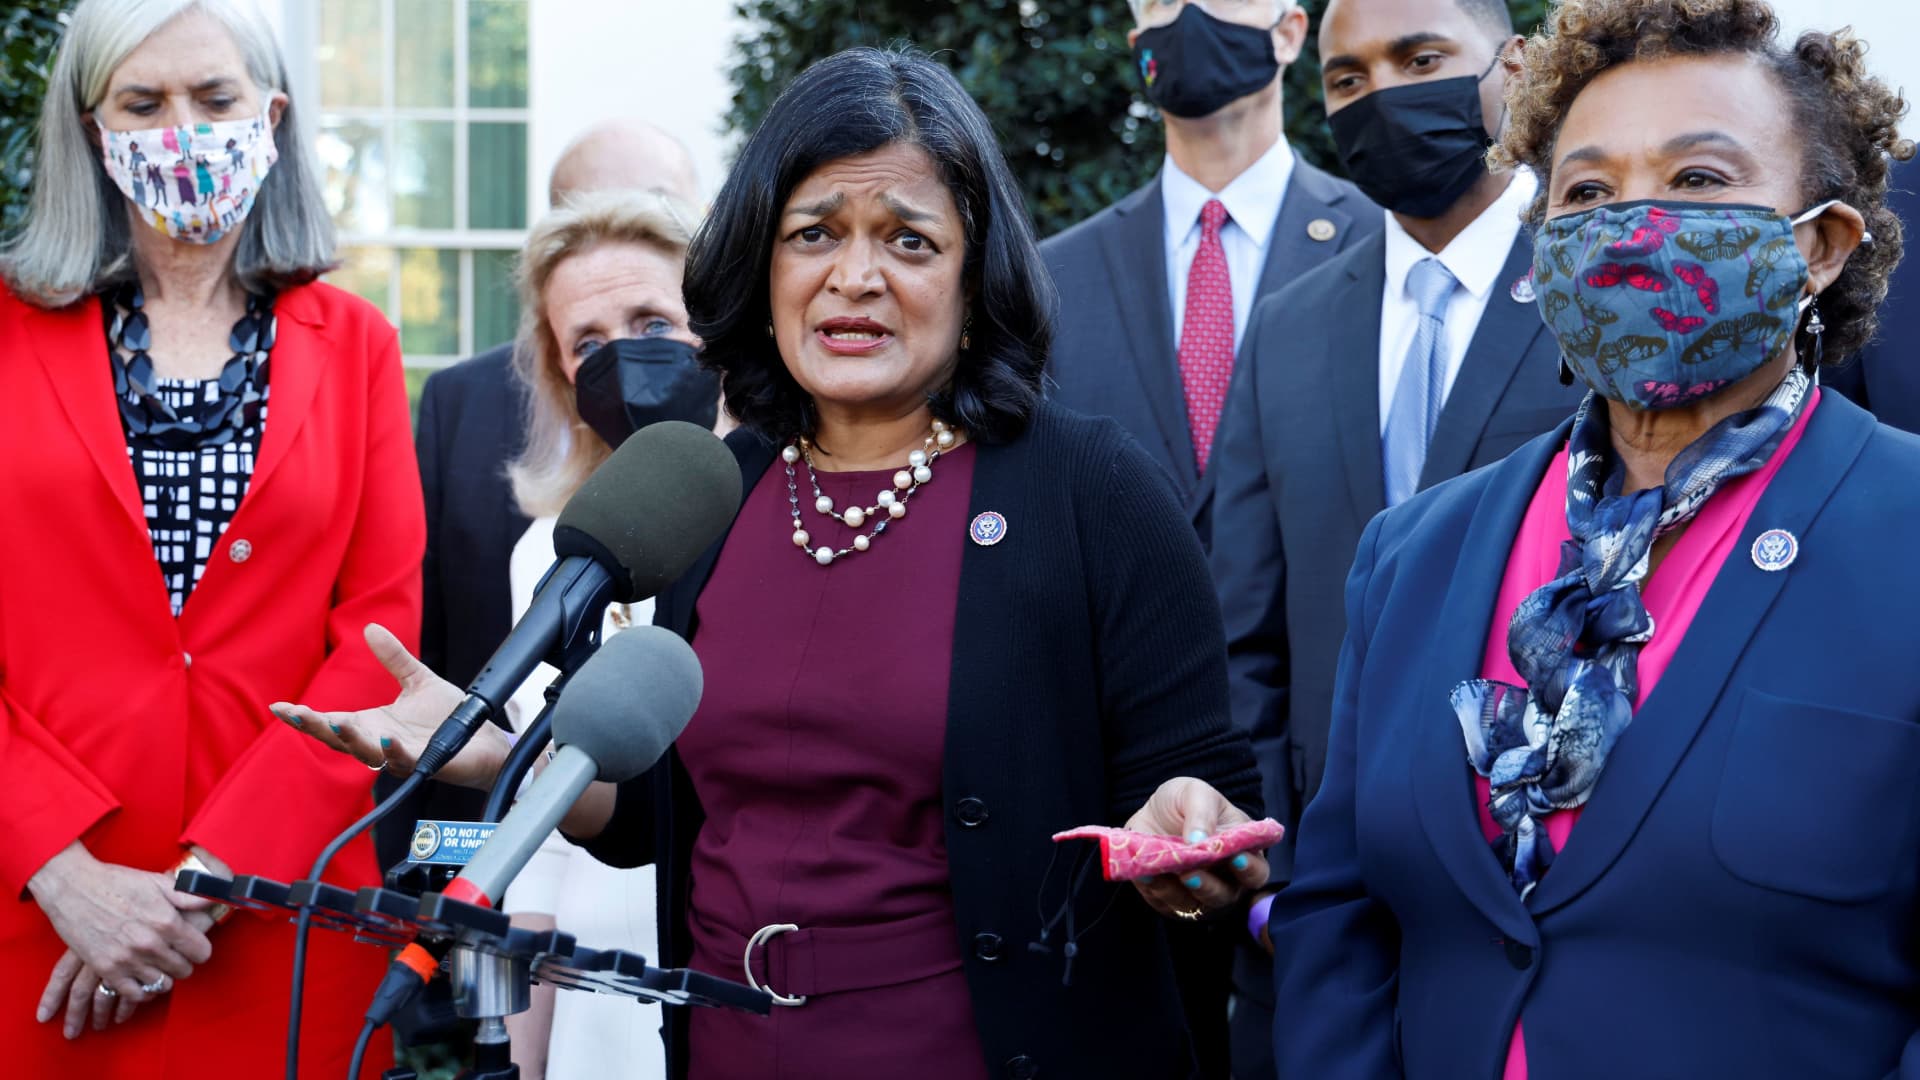 U.S. Representative Pramila Jayapal (D-WA), with Rep. Katherine Clark (D-MA), Rep. Debbie Dingell (D-MI), Rep. Jared Huffman (D-CA), Rep. Ritchie Torres (D-NY) and Rep. Barbara Lee (D-CA), leads a group of Democratic members of Congress out of the West Wing to speak to reporters after meeting with President Joe Biden about infrastructure legislation at the White House in Washington, October 19, 2021.